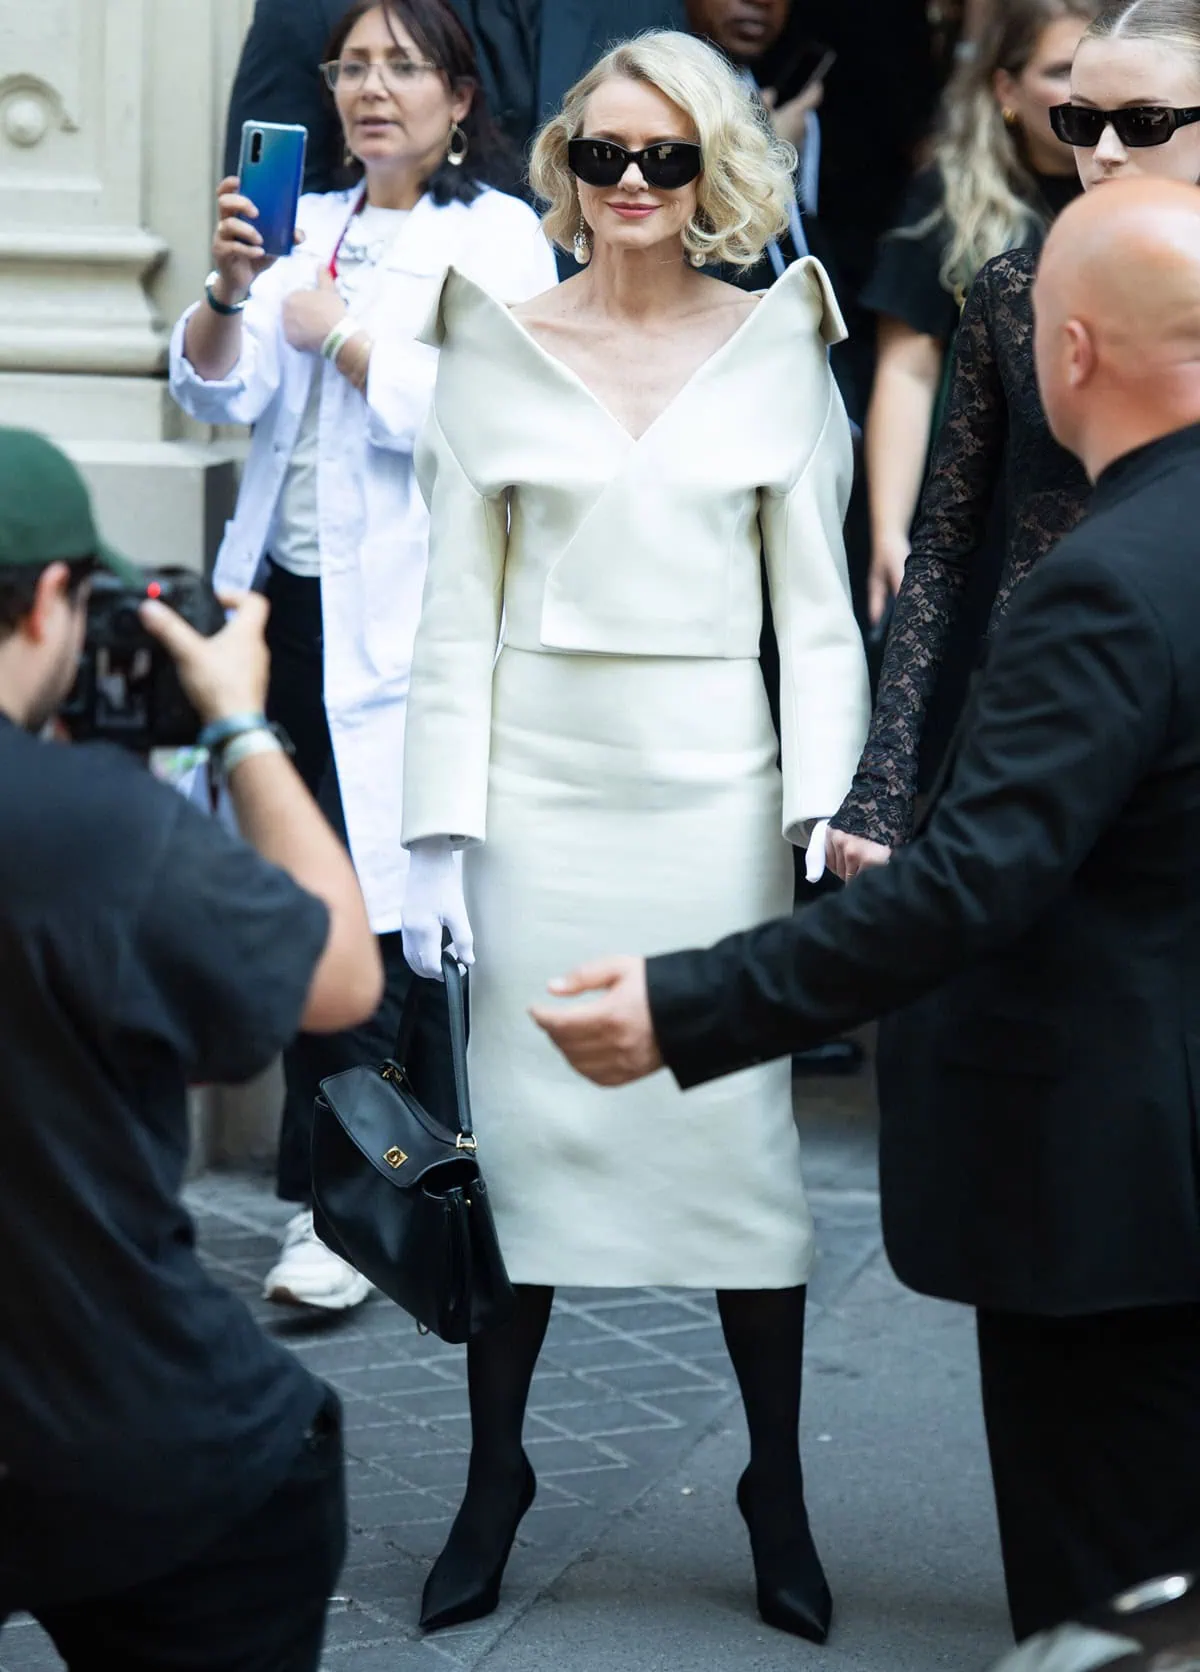 Naomi Watts dazzled at the Balenciaga show in a white skirt suit with a deep V neckline, paired with sheer black tights, black stilettos, matching white gloves, and statement diamond earrings